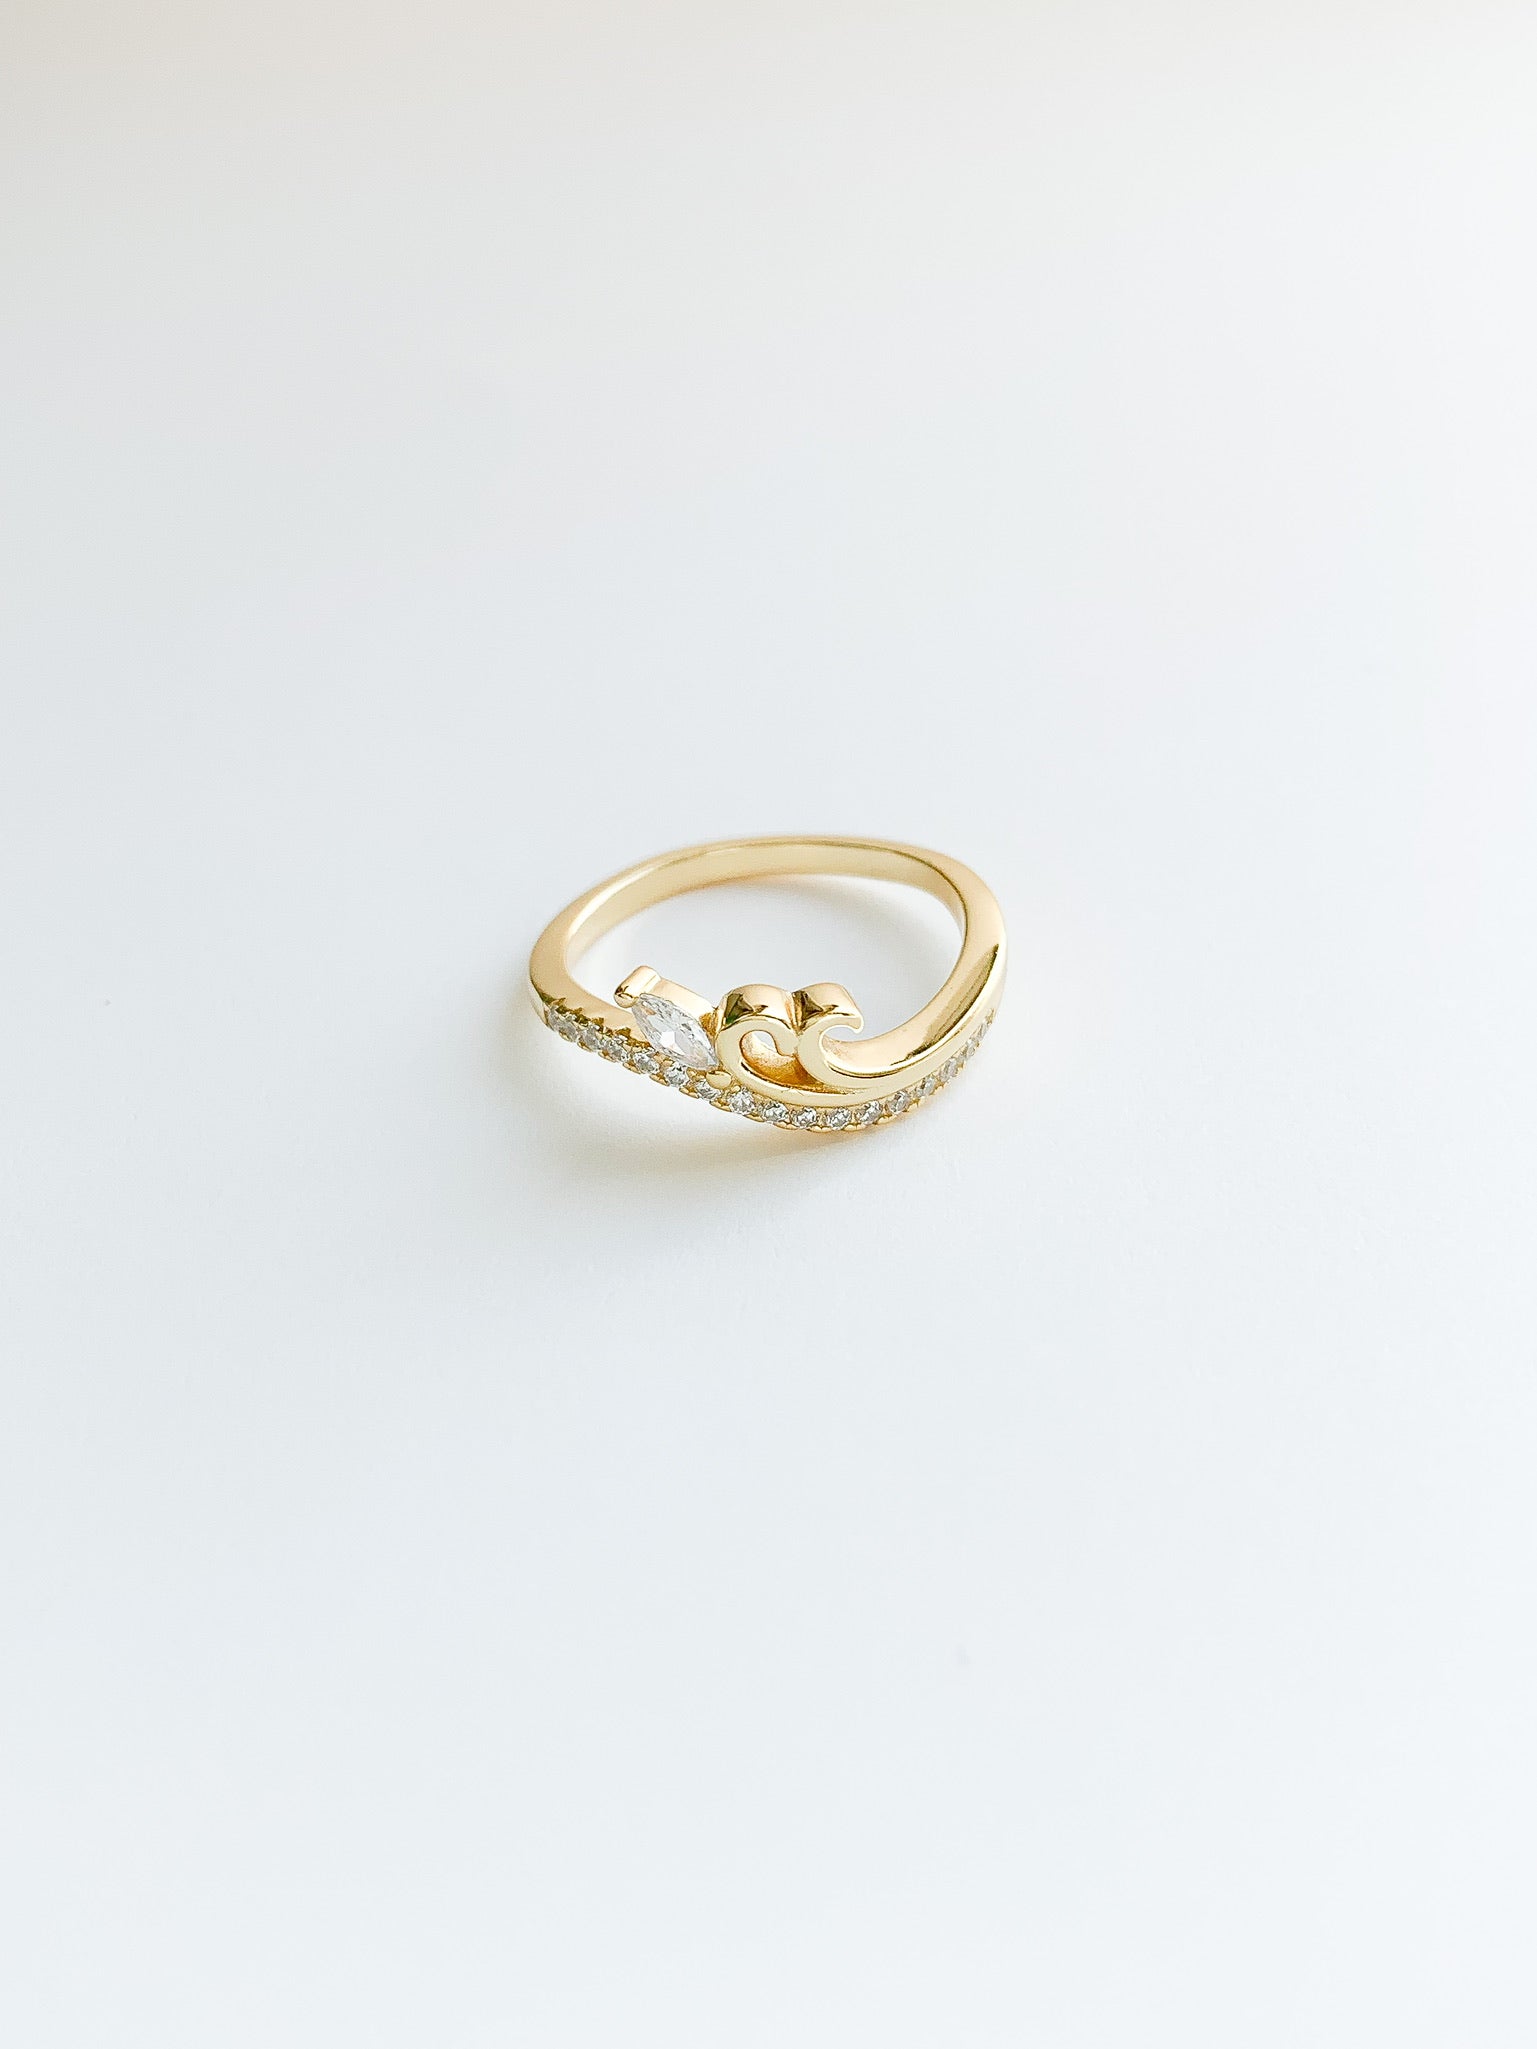 Magical sparkling wave ring in gold over sterling